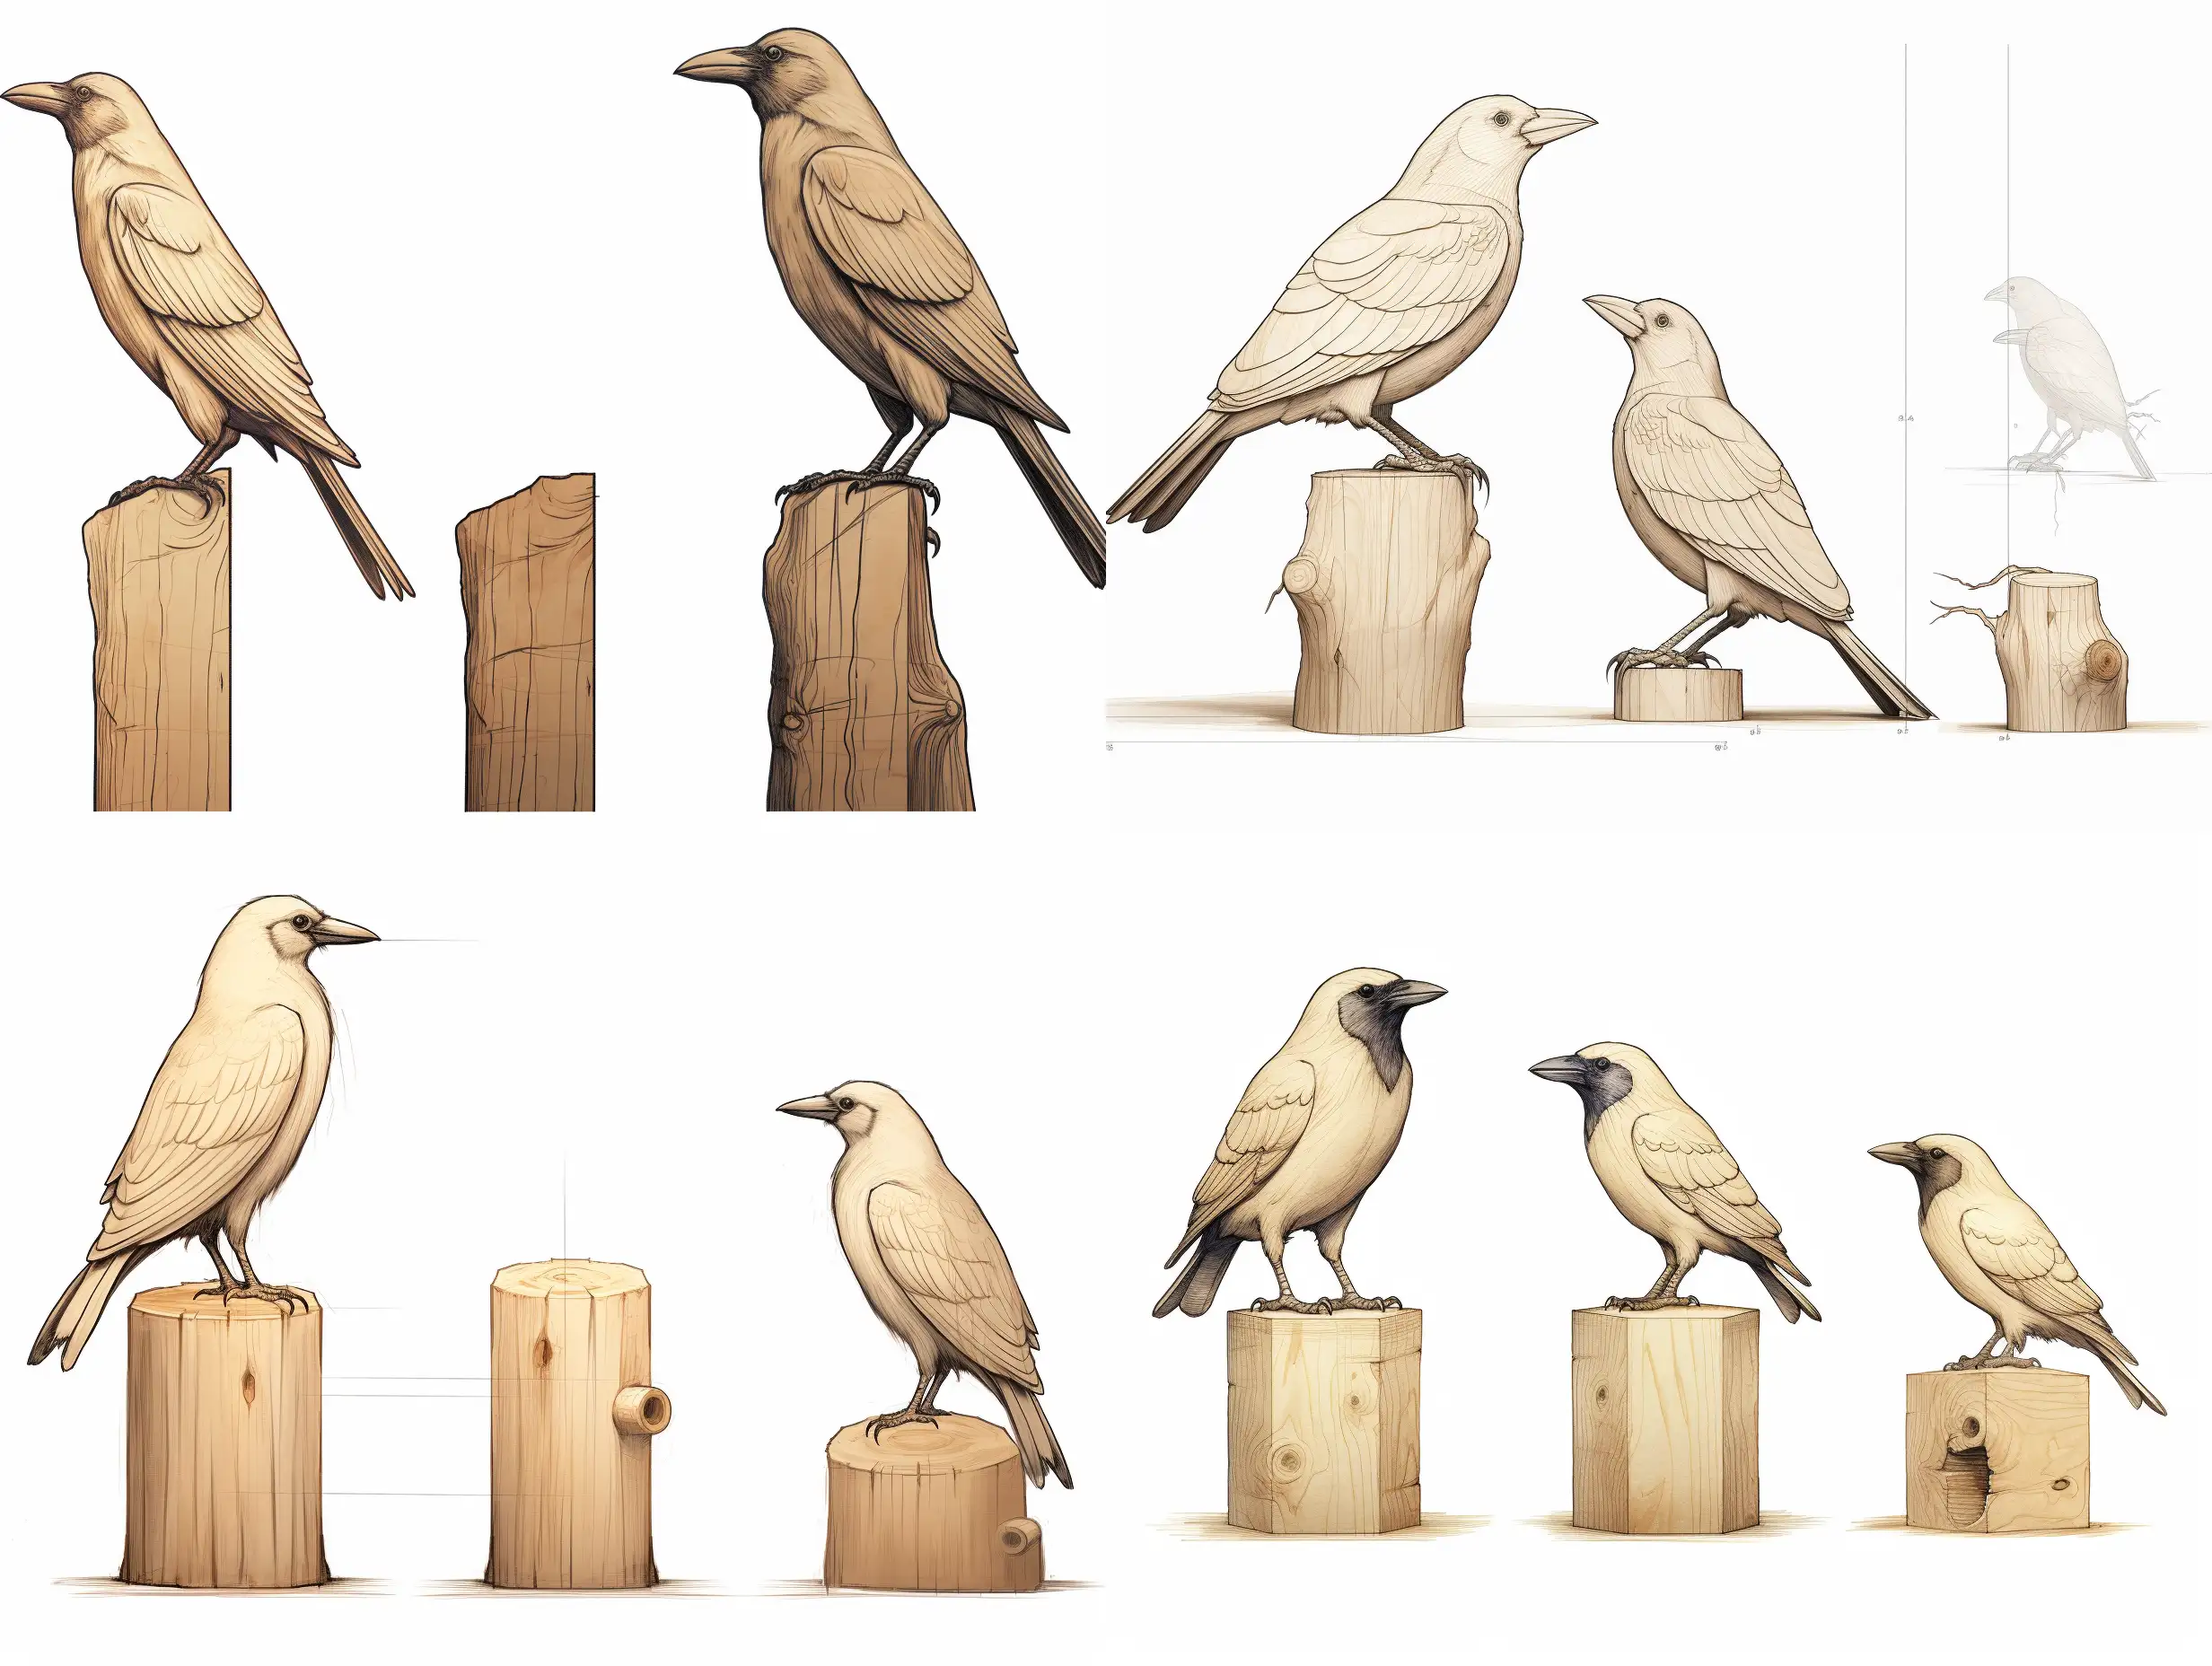 Realistic-Wooden-Raven-Sculpture-on-Cube-Professional-Wood-Carving-Art